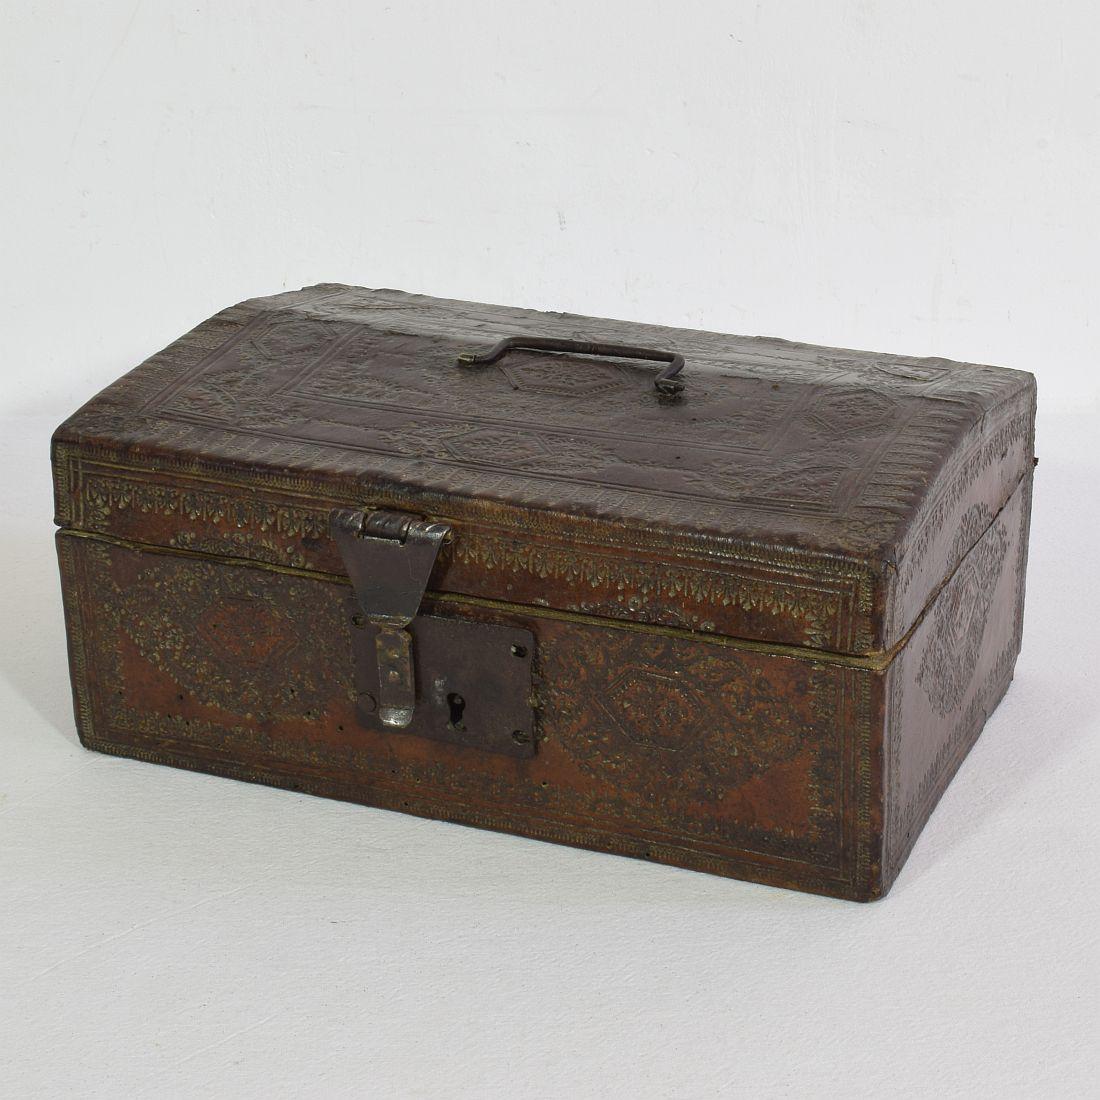 Extremely old box that is covered with leather and metal decorations. 
Rare find.
France, circa 1600-1700.
Weathered and some losses.